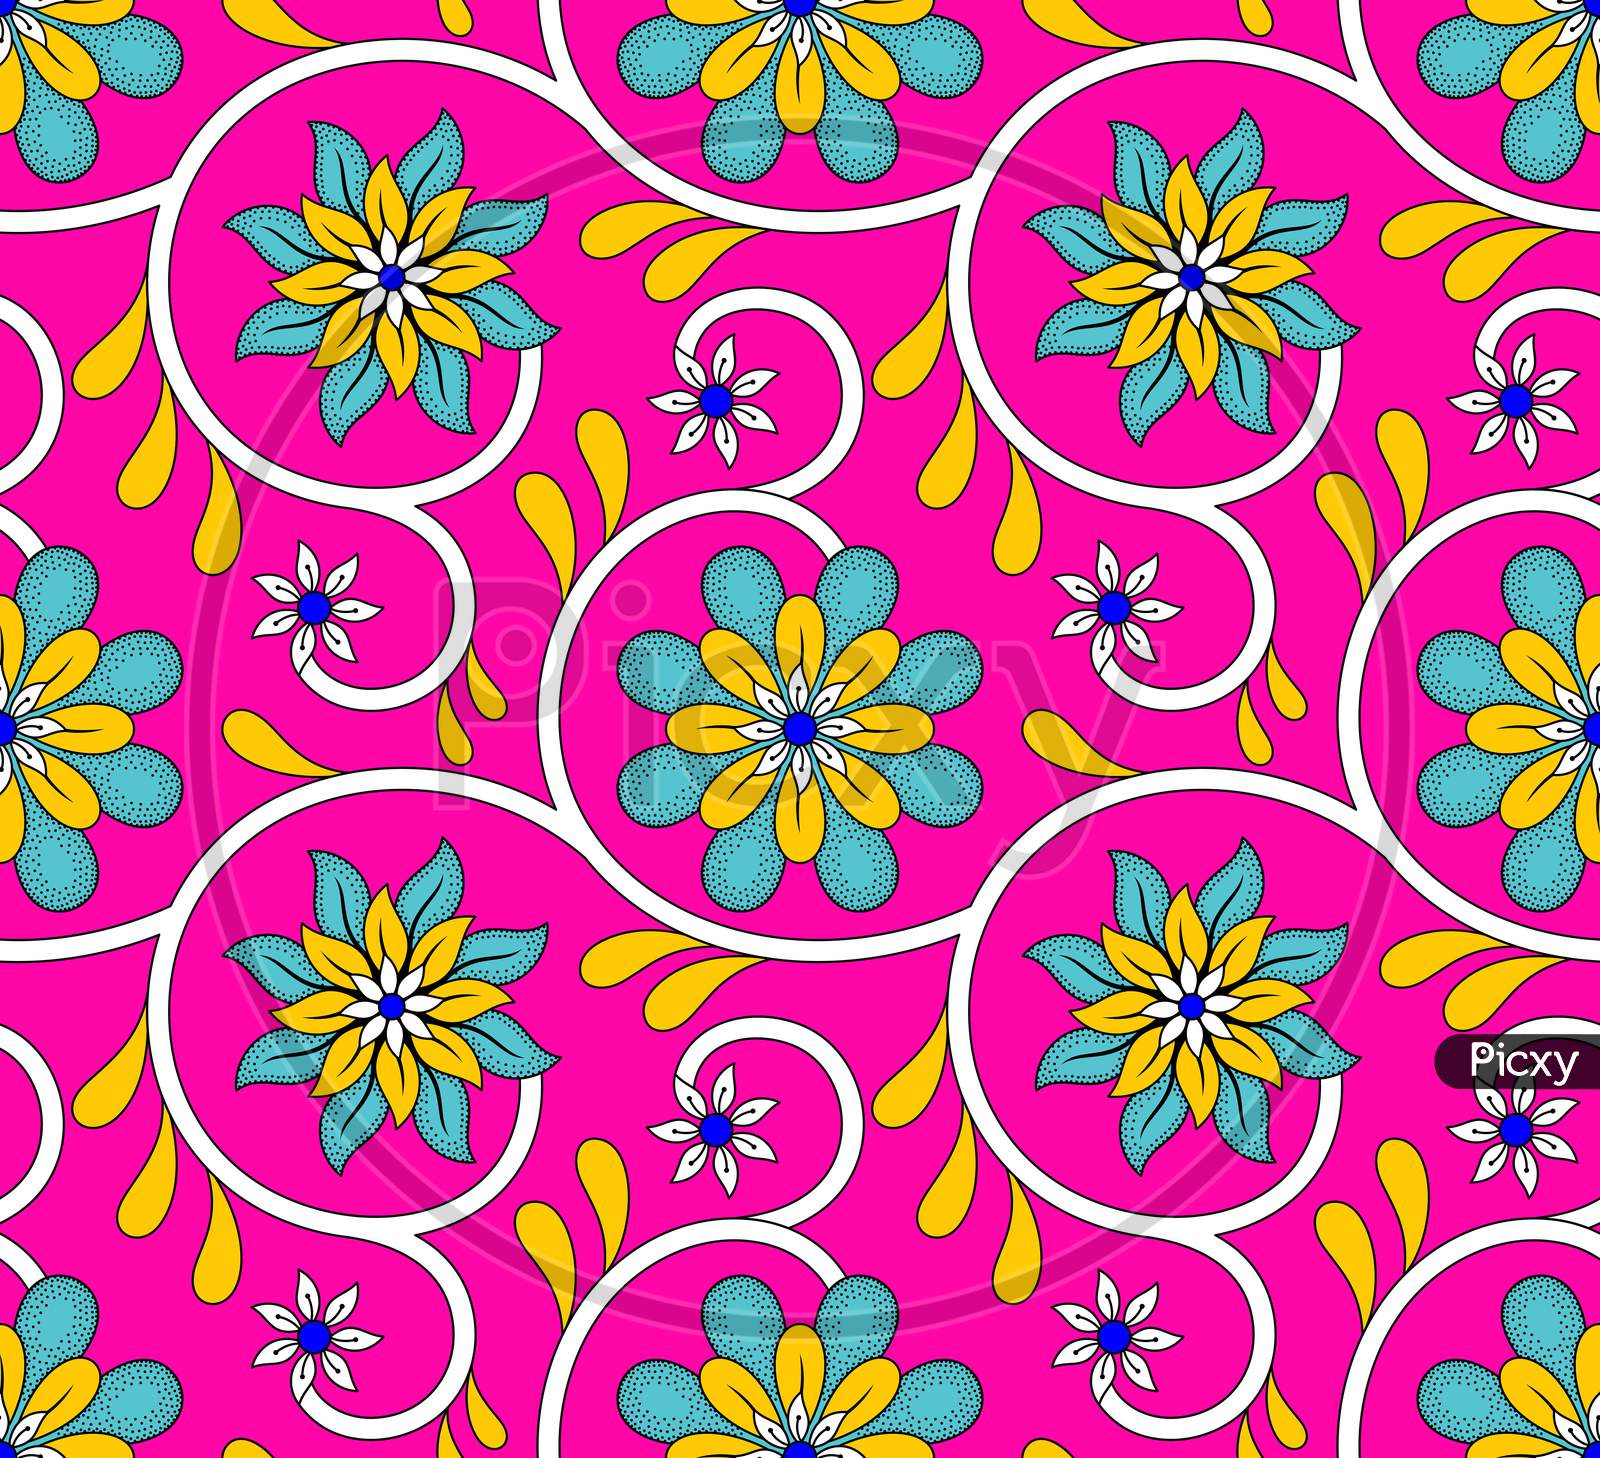 Colorful Vector Seamless Floral Pattern With Flowers